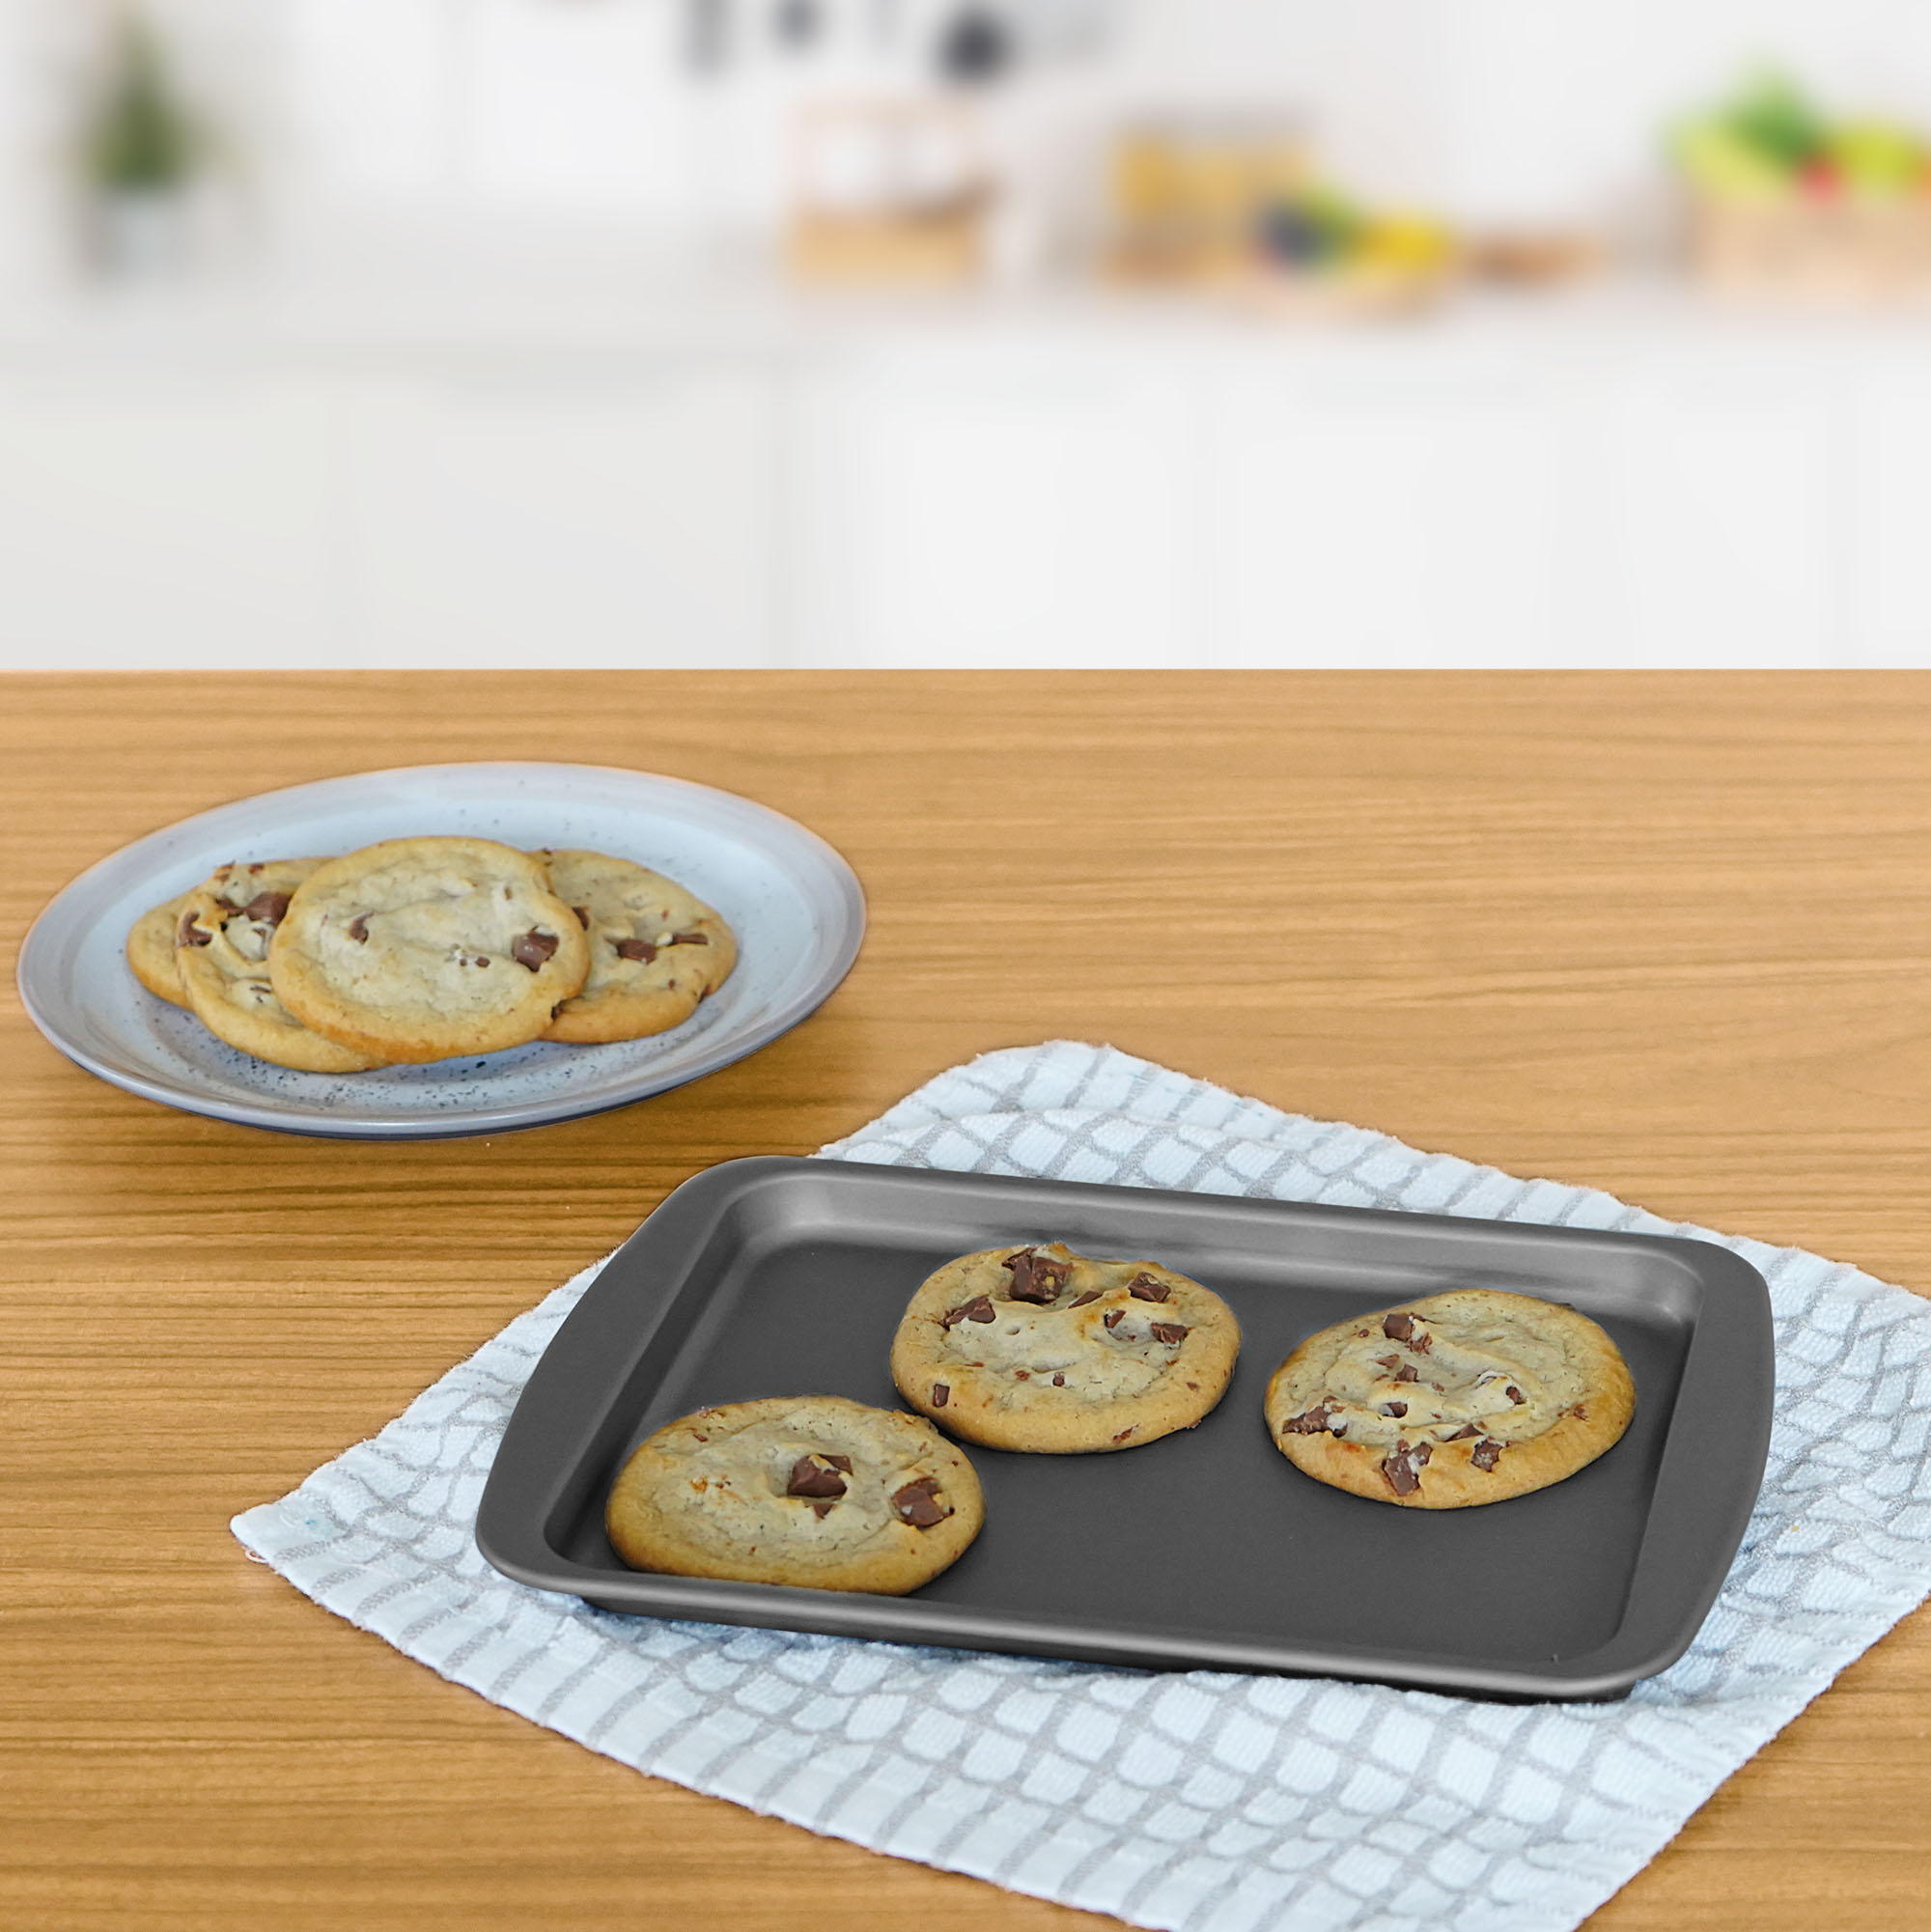 Mainstays Nonstick Mini Cookie Sheet,  8.5" x 6.5", Toaster Oven Pan, Gray - image 5 of 7